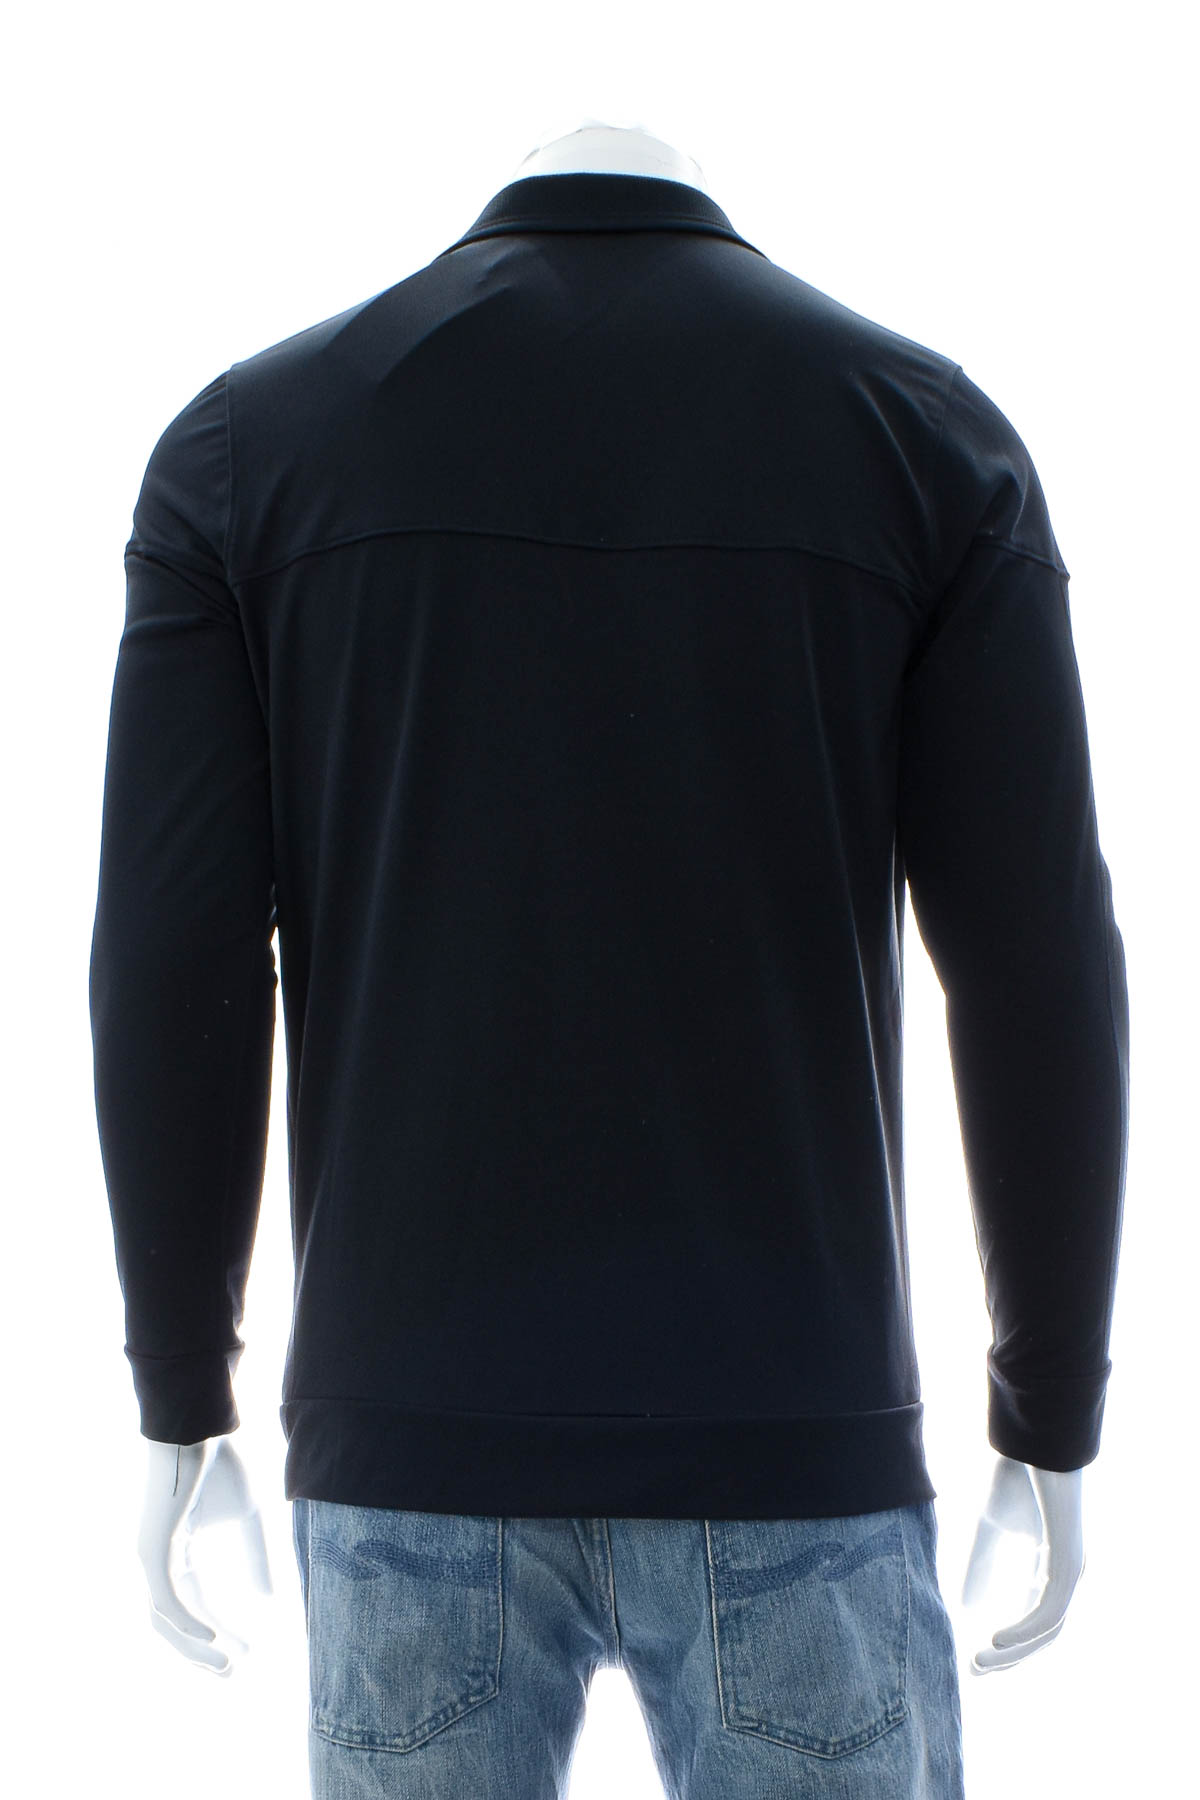 Male sports top - UNDER ARMOUR - 1